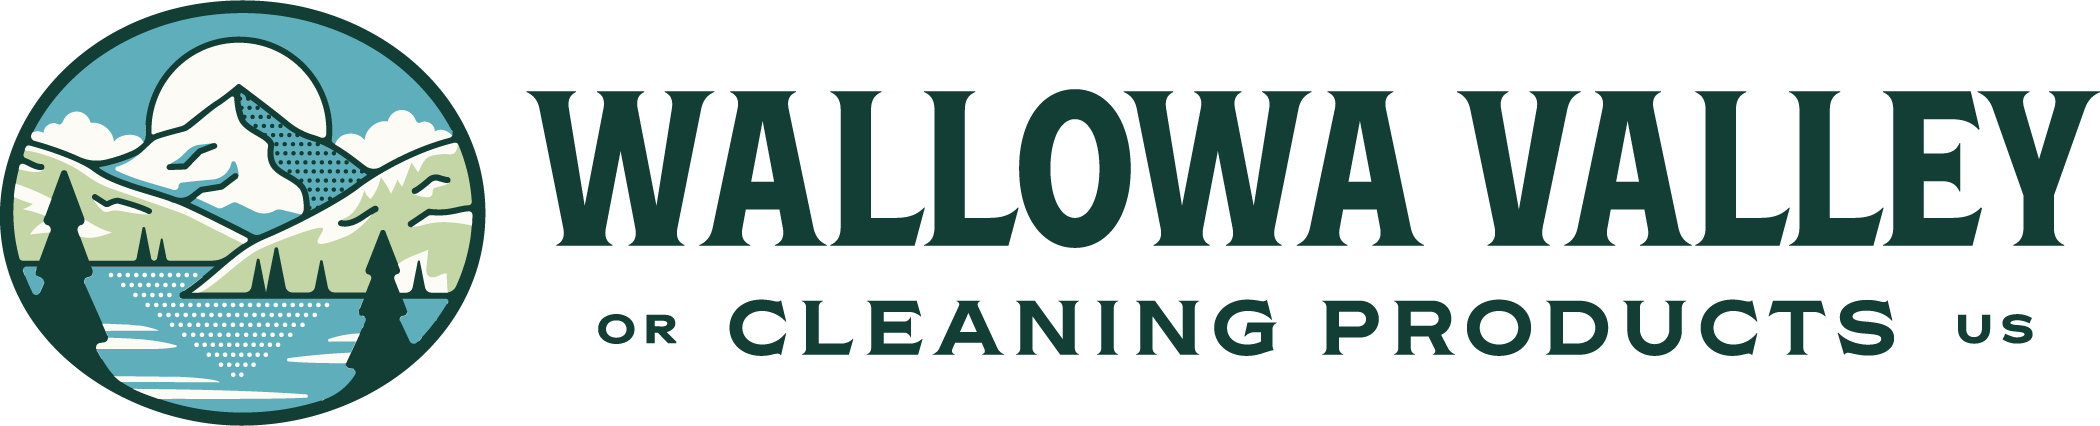 Wallowa Valley Cleaning Products